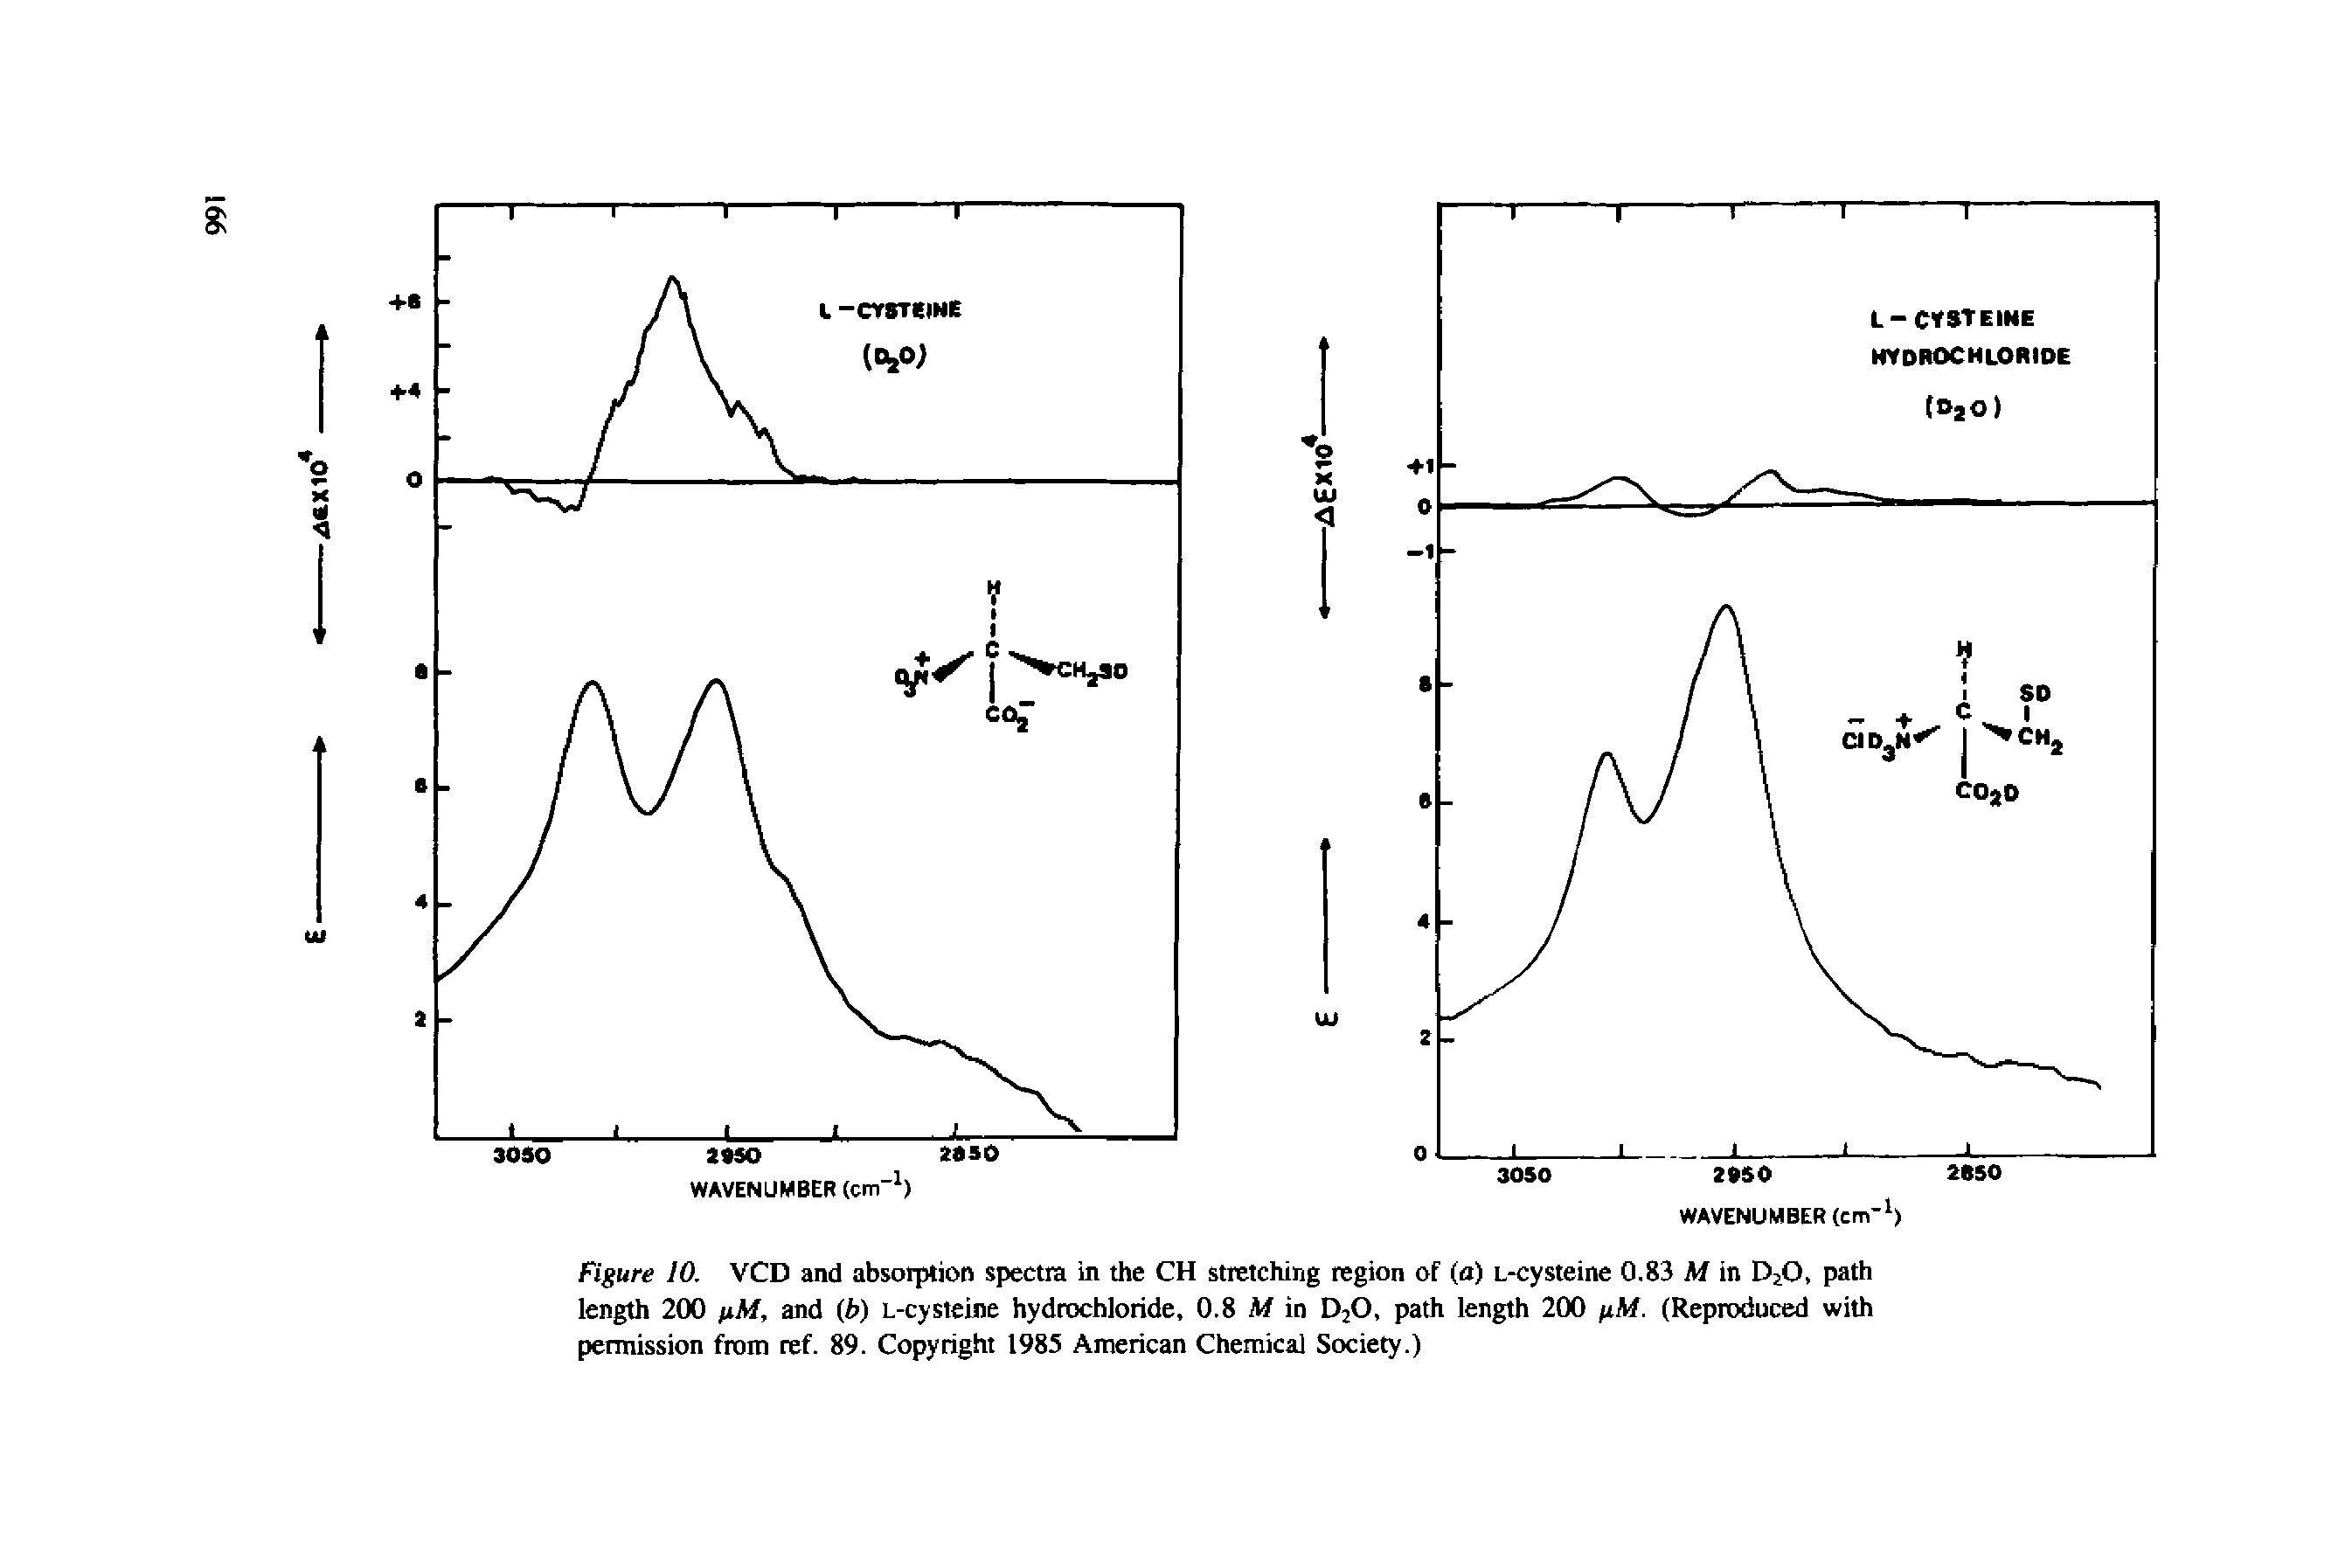 Figure 10. VCD and absorption spectra in the CH stretching region of (a) L-cysteine 0.83 M in DjO, path length 200 nM, and (b) L-cysteine hydrochloride, 0.8 M in D2O, path length 200 iiM. (Reproduced with permission from ref. 89. Copyright 1985 American Chemical Society.)...